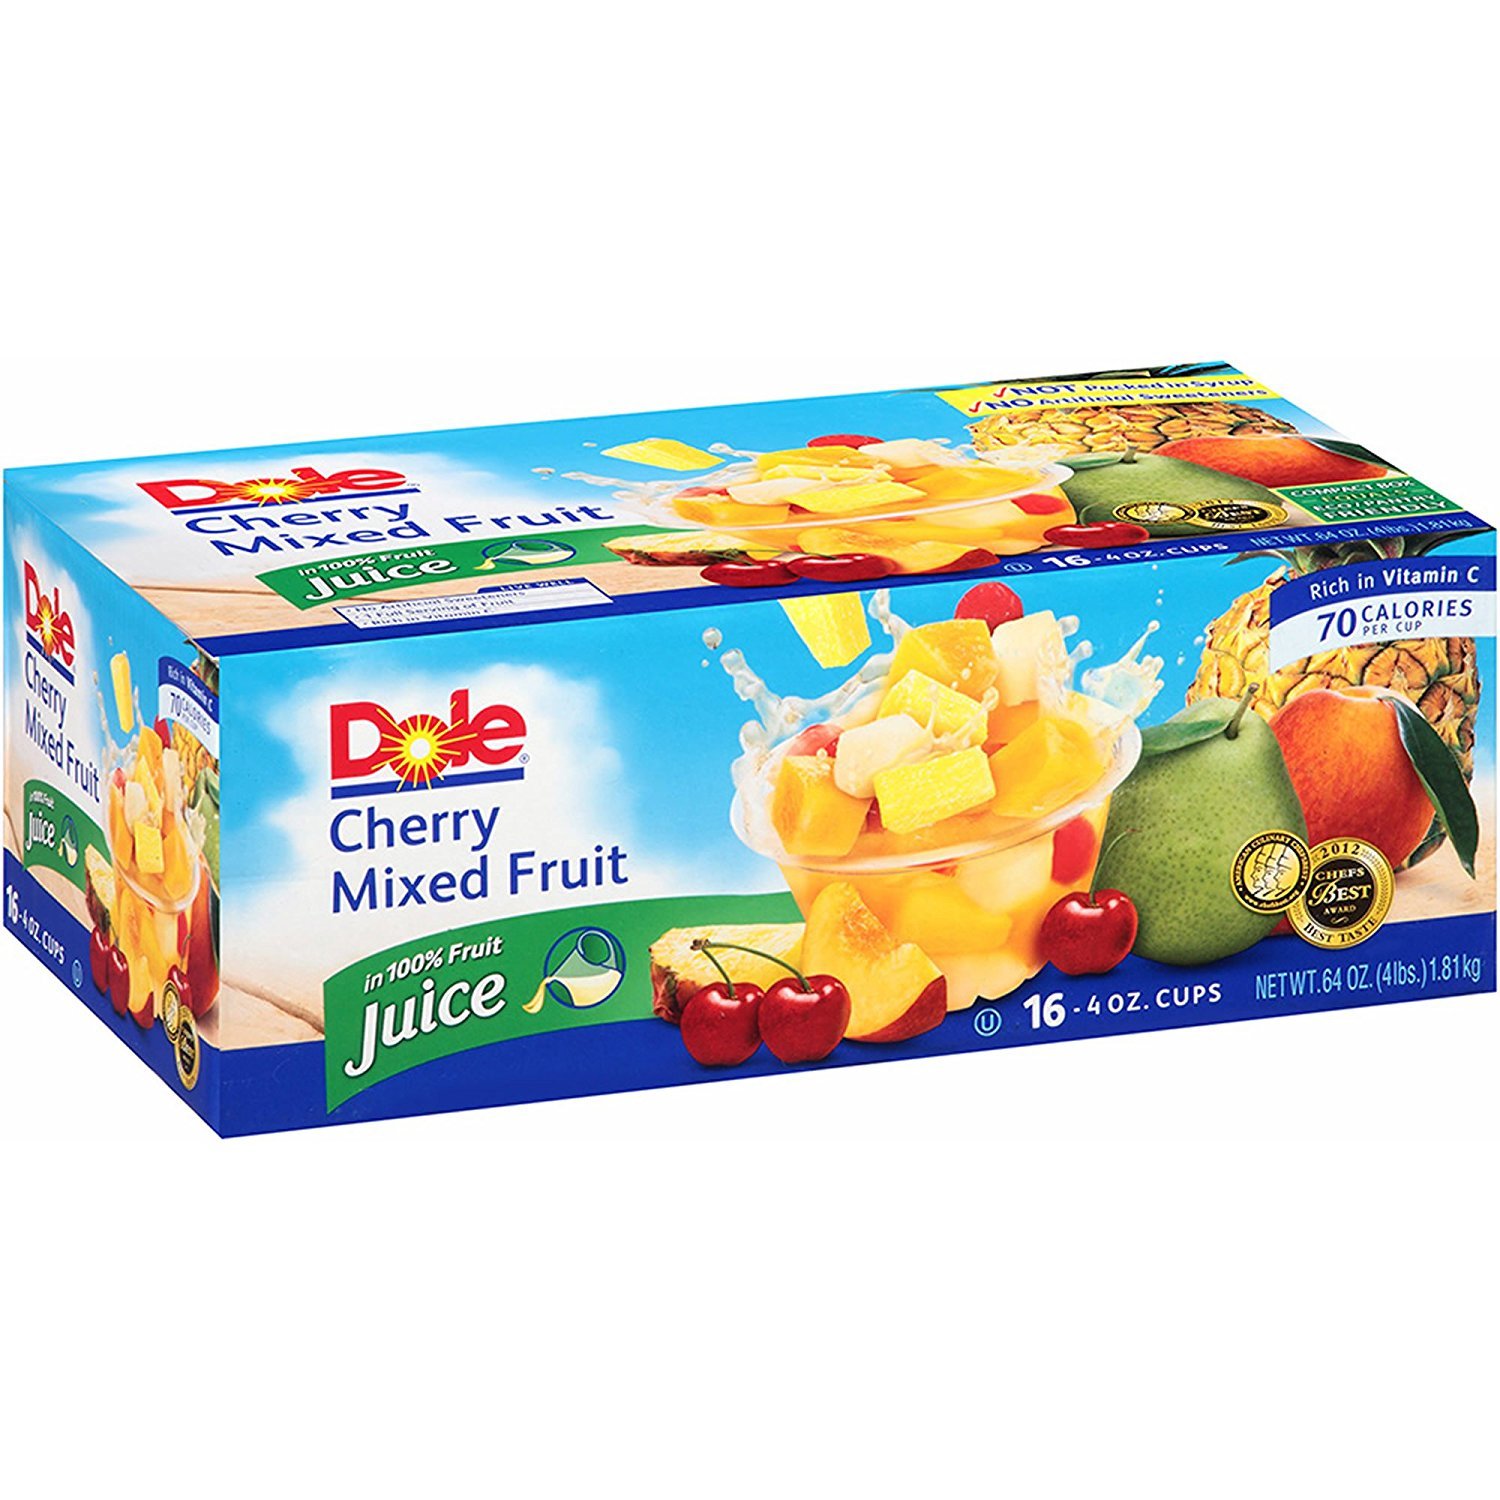 Dole Cherry Mixed Fruit Cups, 16 pk./4 oz. (pack of 2)